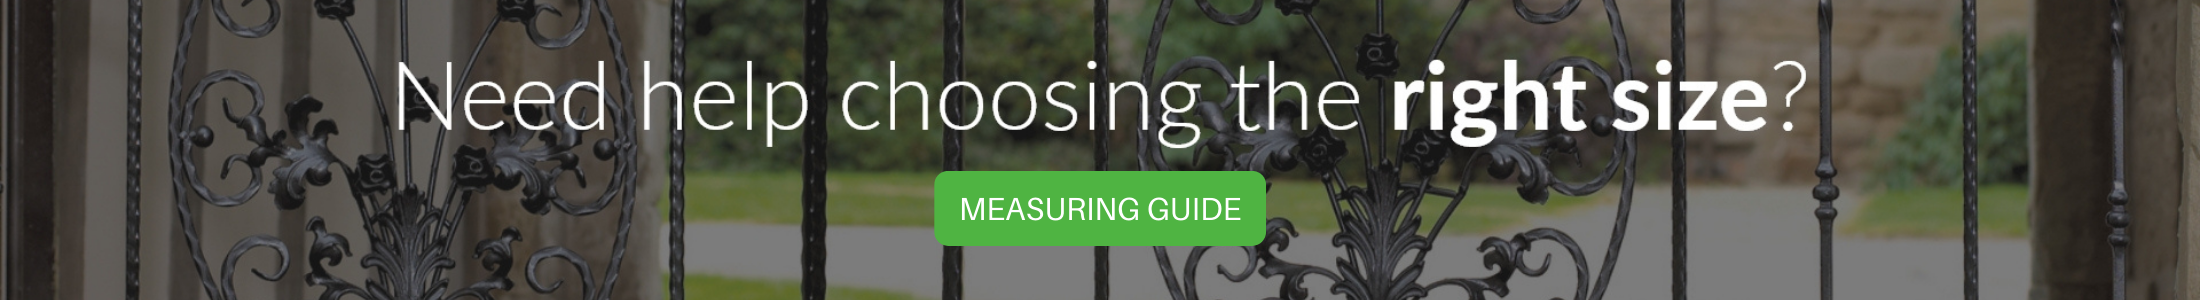 Need help with ordering sizes? Refer to the measuring guide for more information